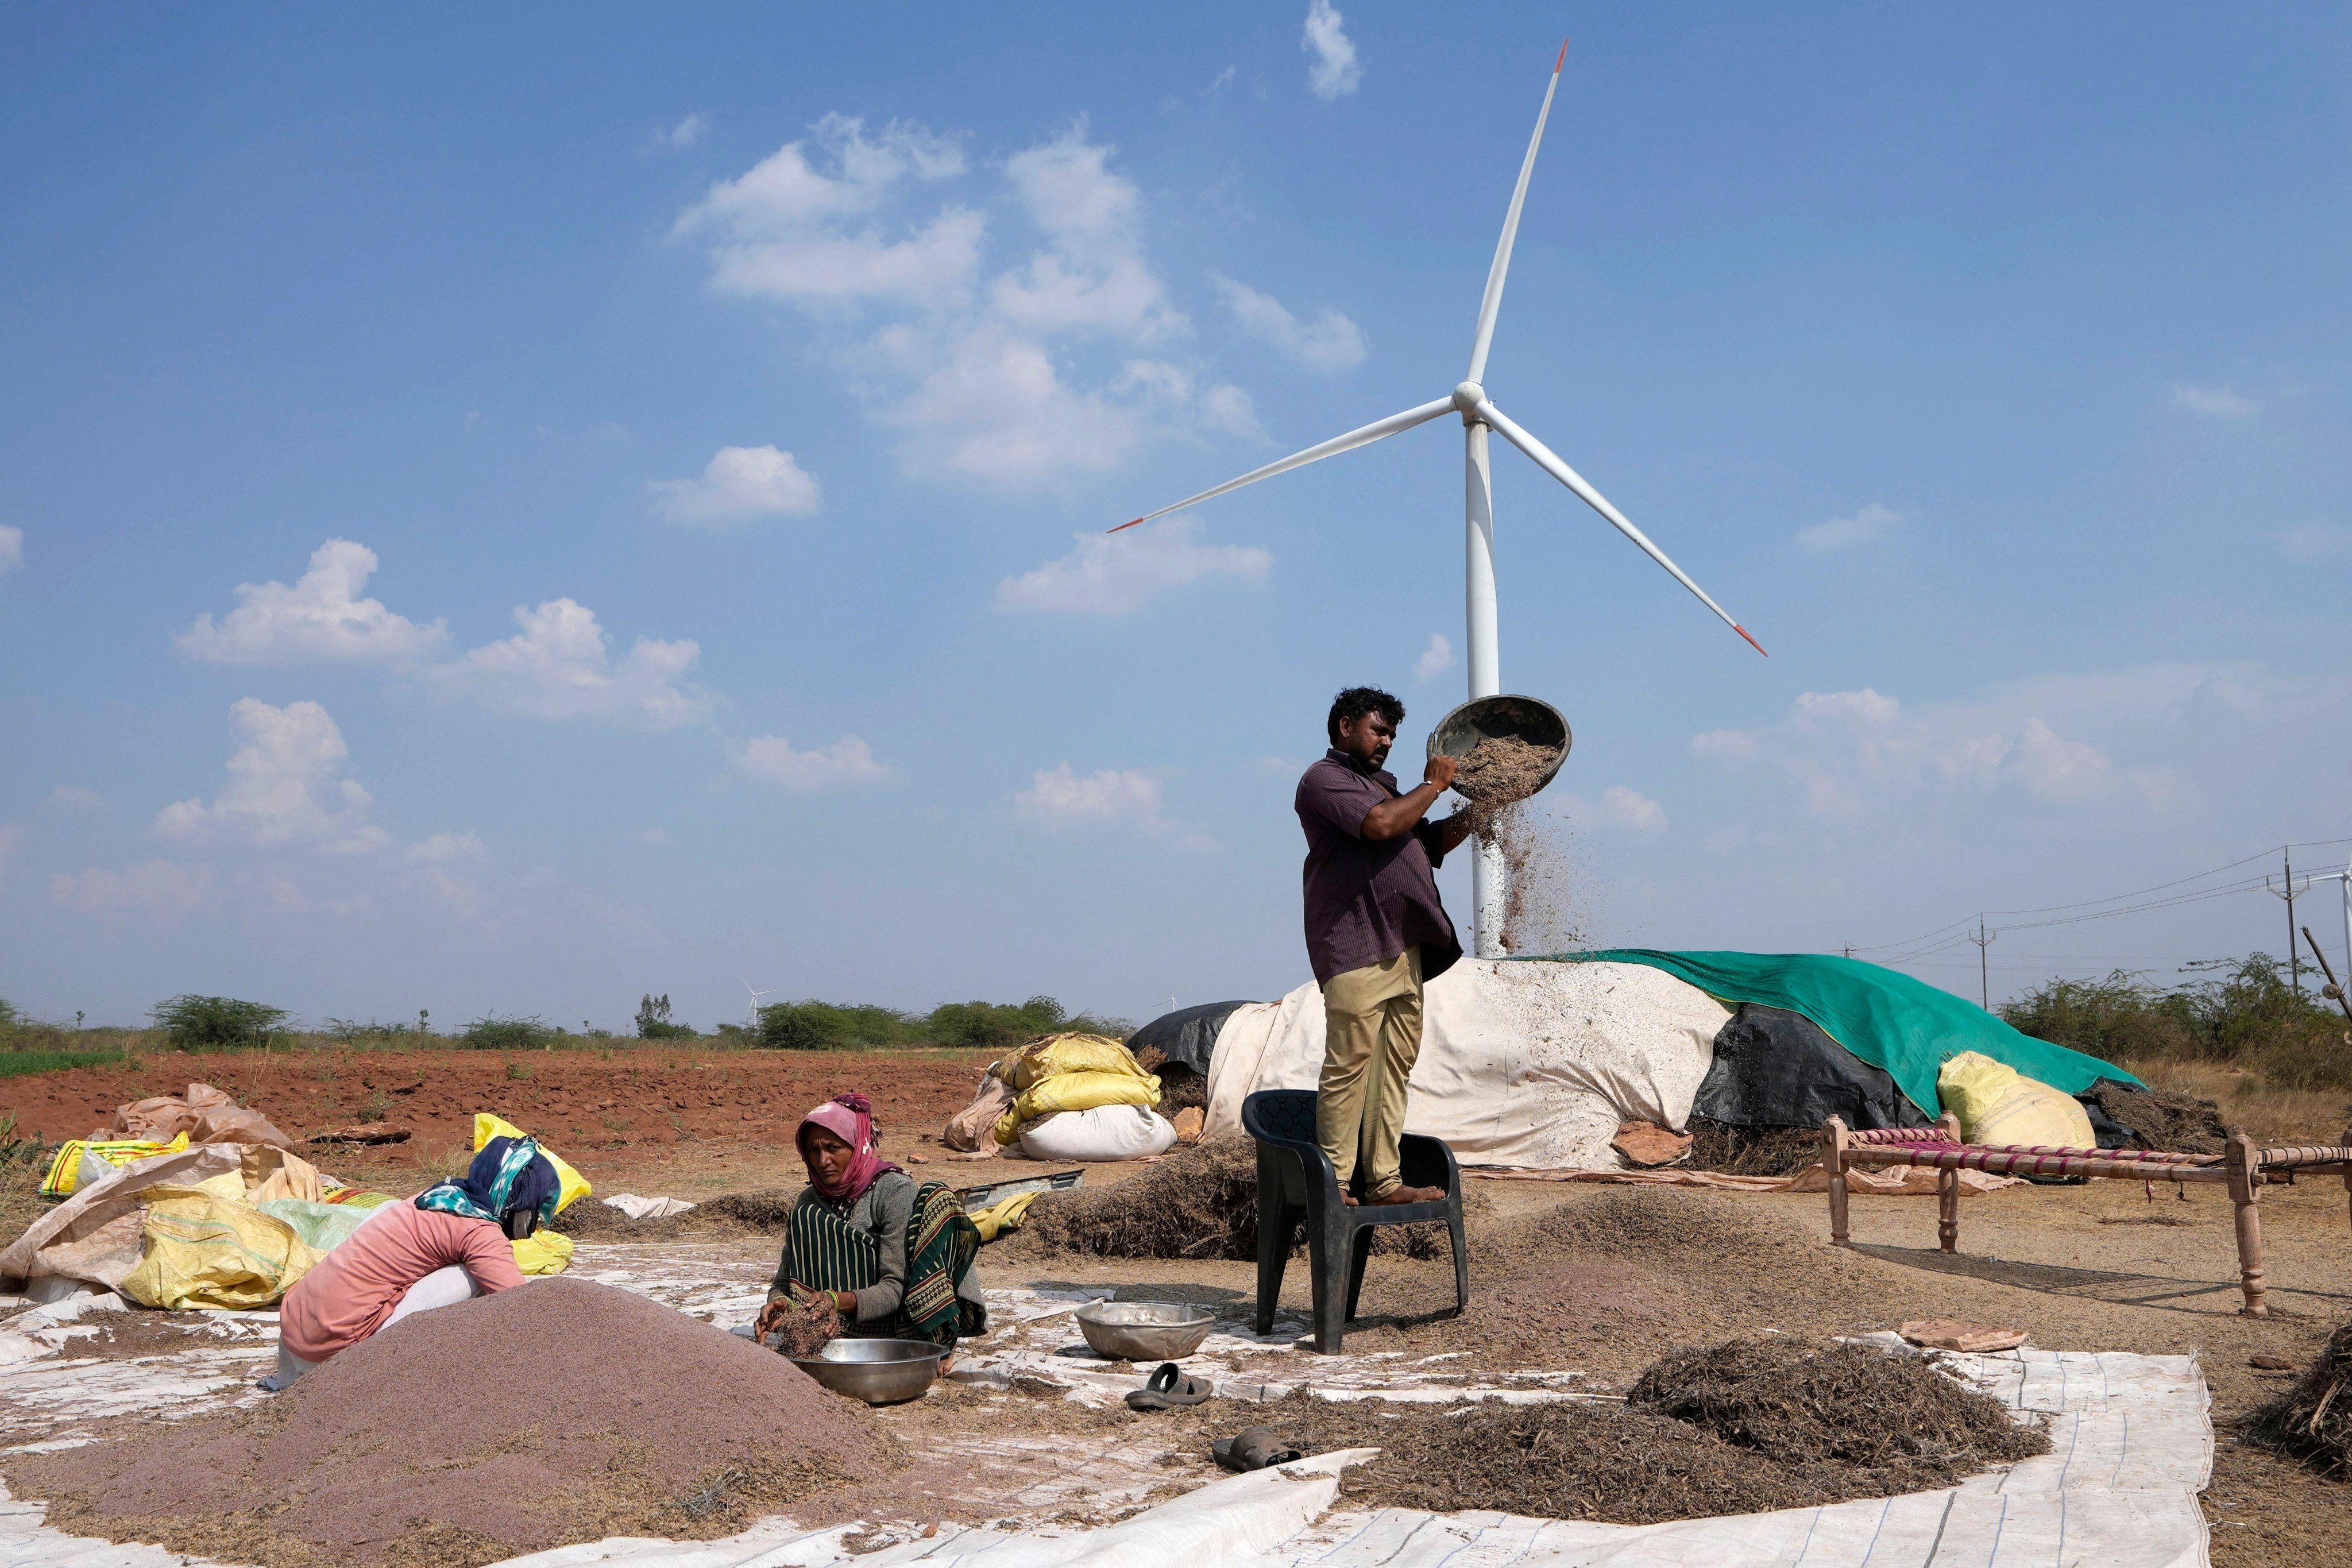 A family works in a field near a wind turbine near Sadla village in Surendranagar district of Gujarat state, in India, on March 20. Most renewable energy investment is focused on rich economies and a small group of developing economies led by Brazil, Vietnam, Chile and India. Photo: AP